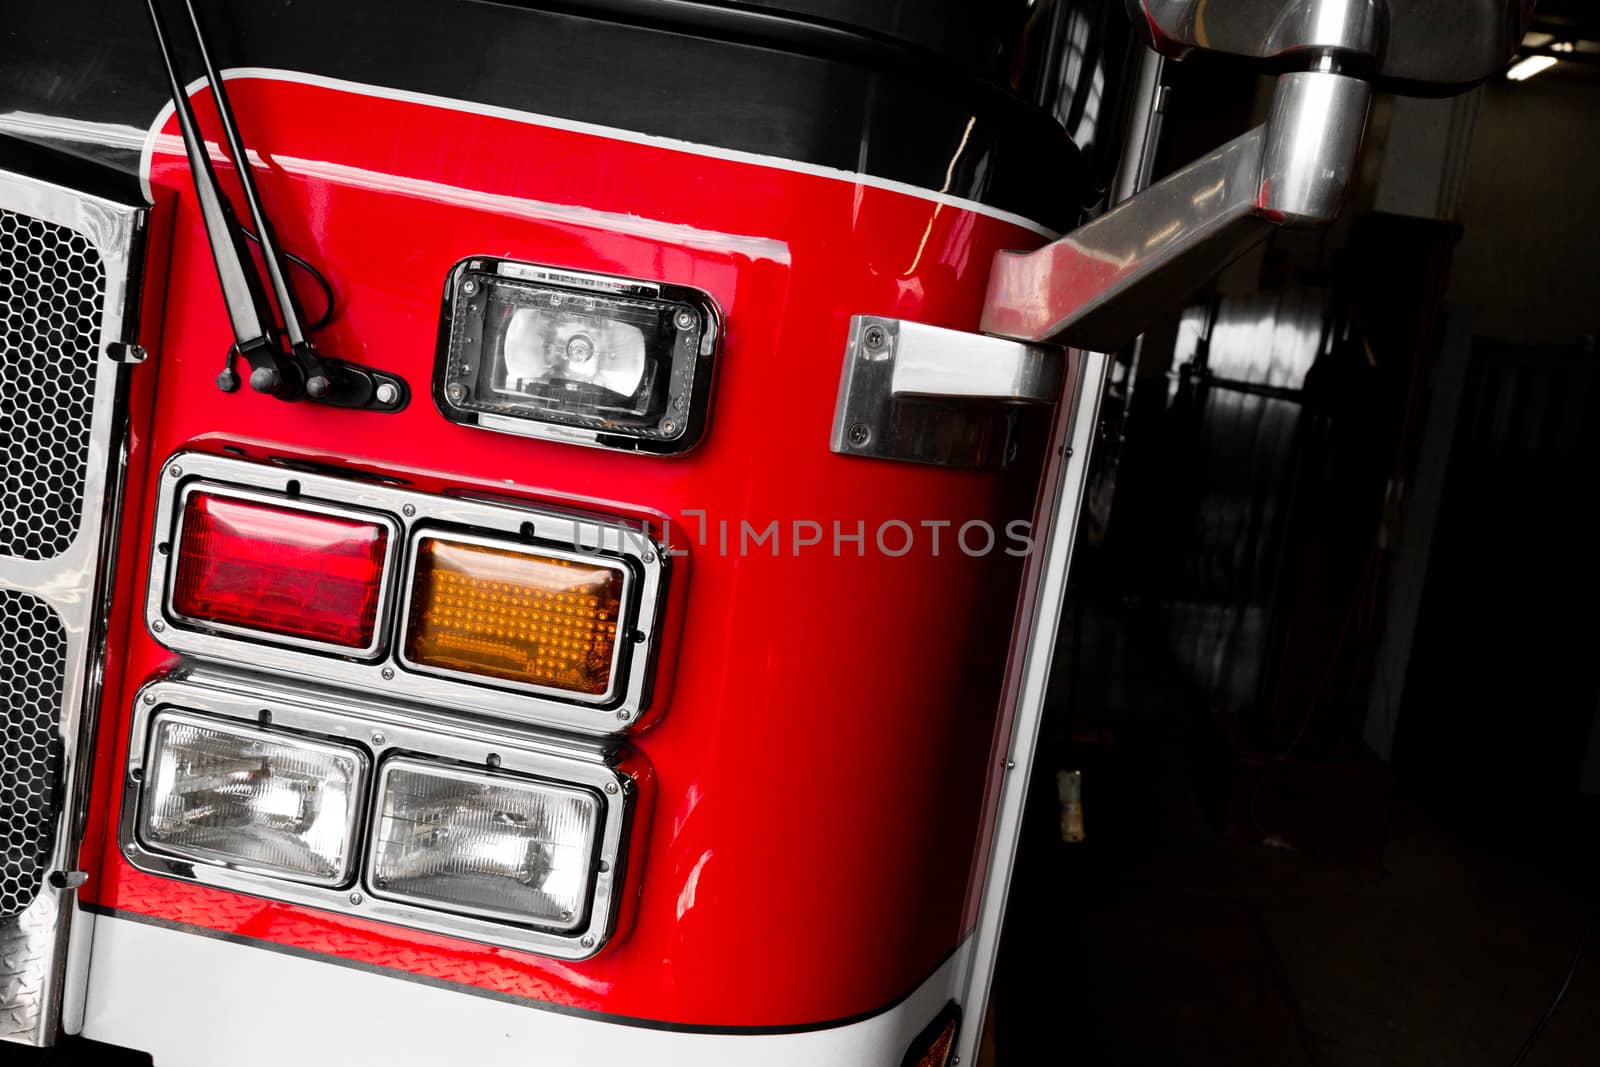 Firetruck Details of the Front and Lights by aetb